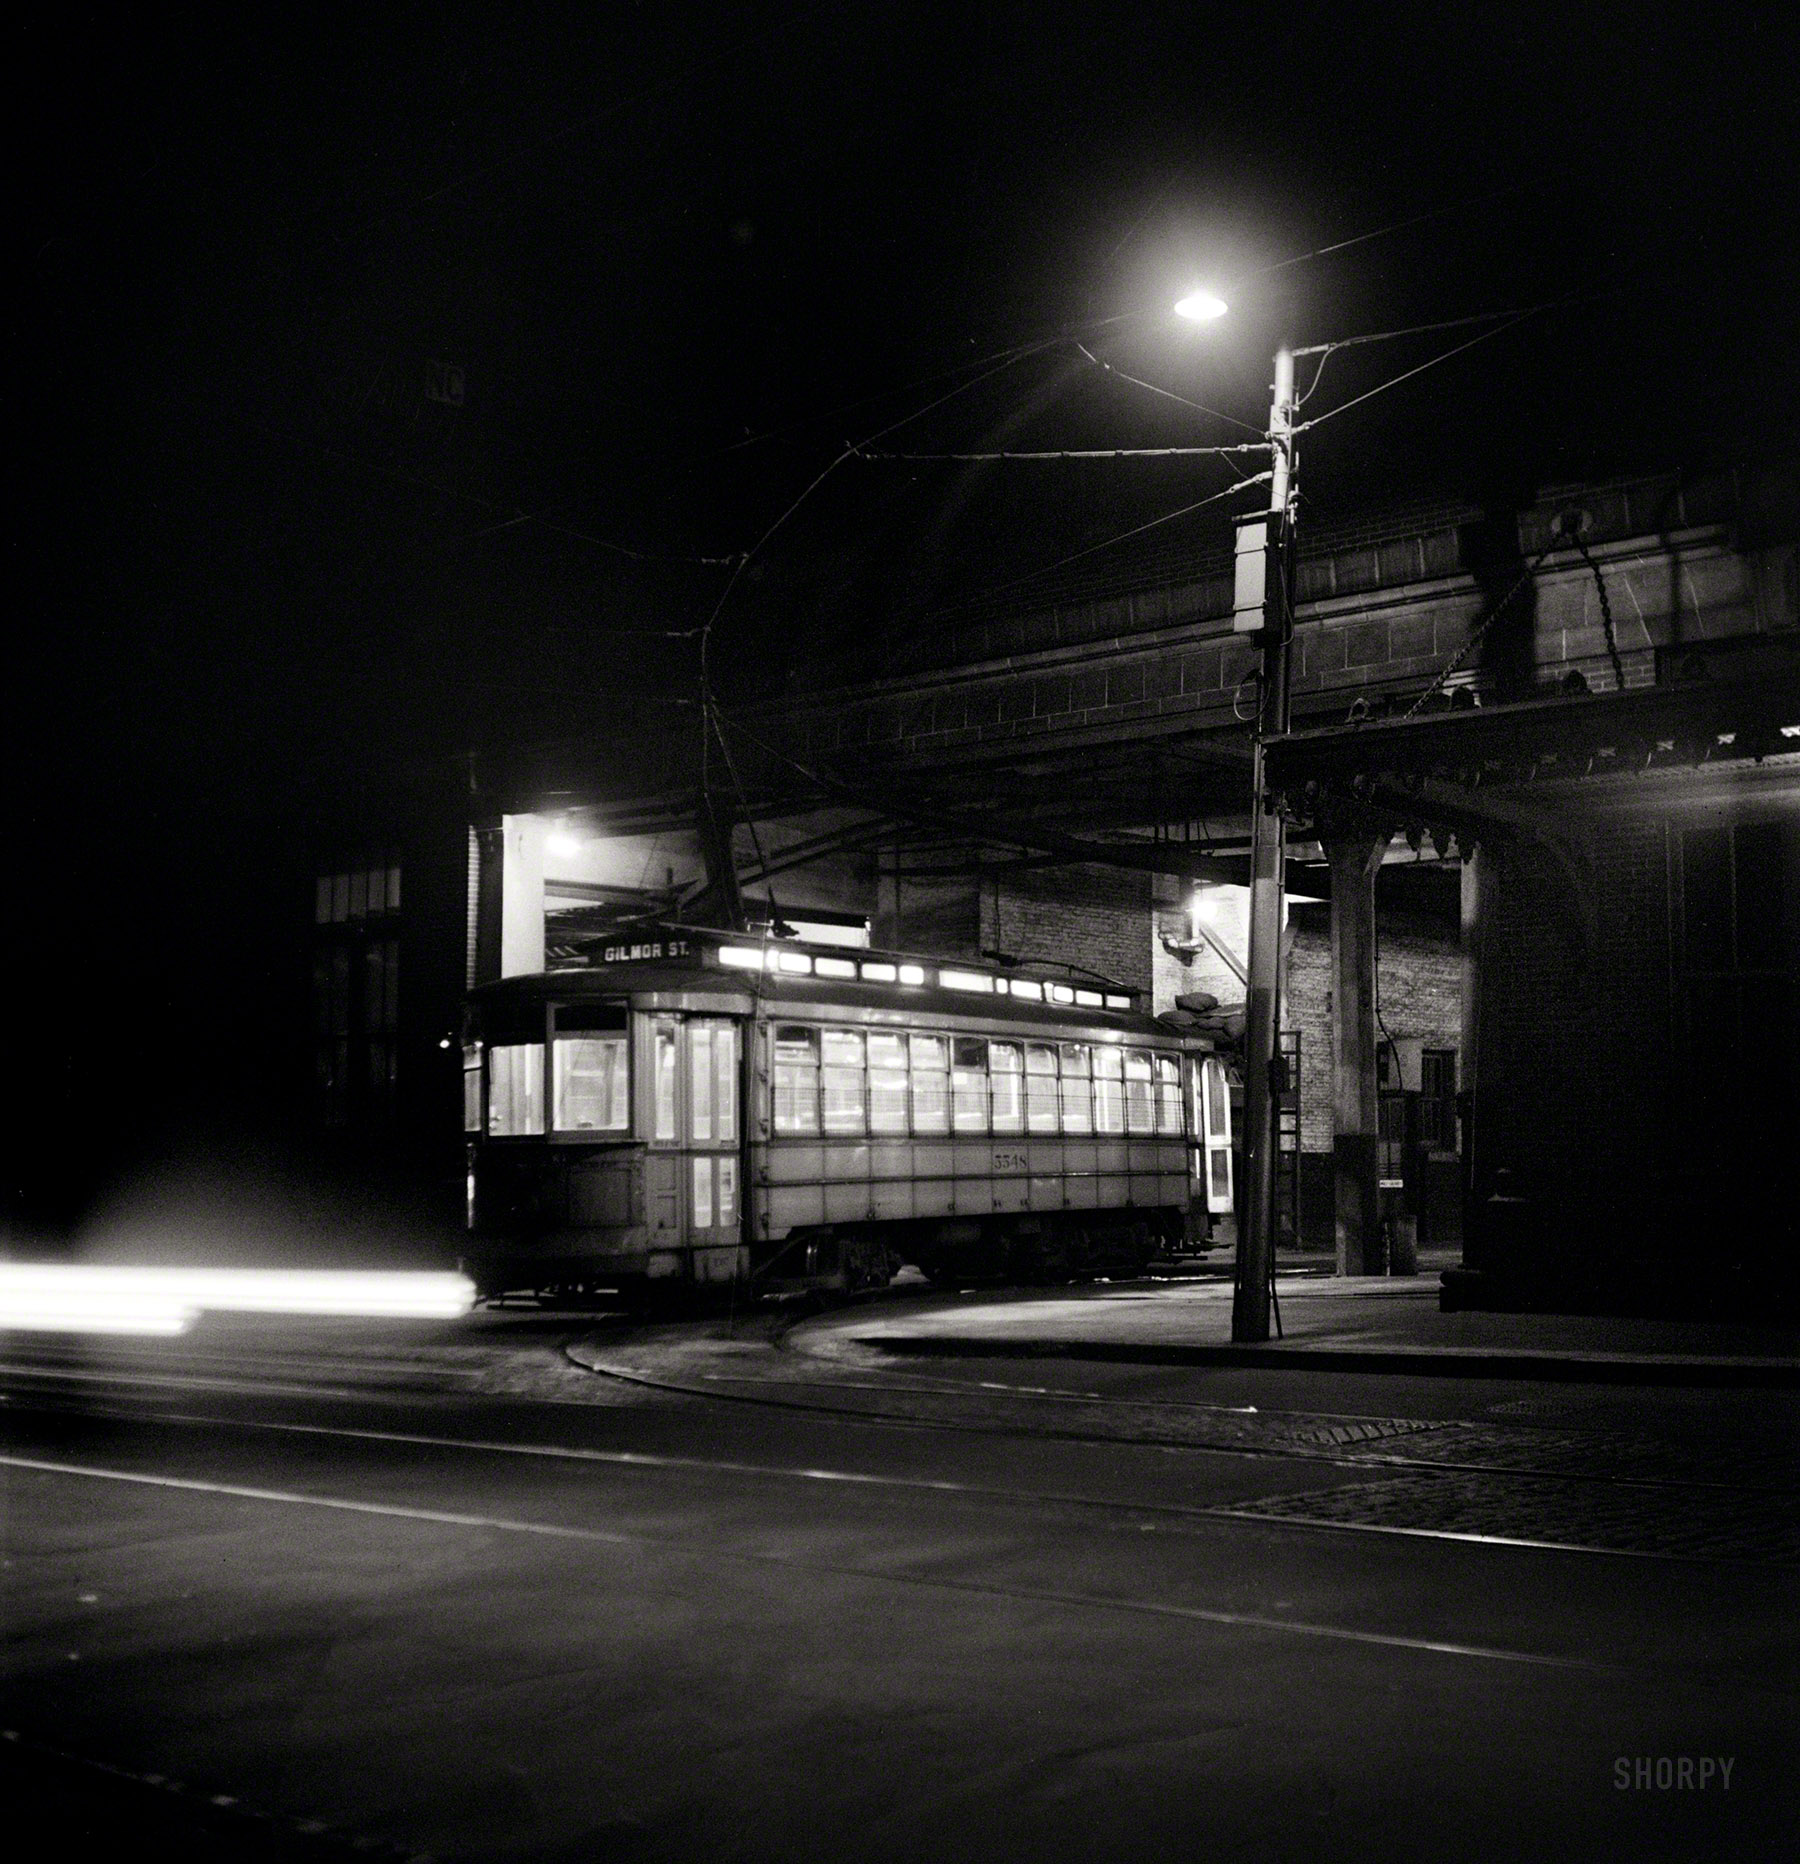 April 1943. "Baltimore, Maryland. Trolley leaving the terminal at night." Photo by Marjory Collins for the Office of War Information. View full size.